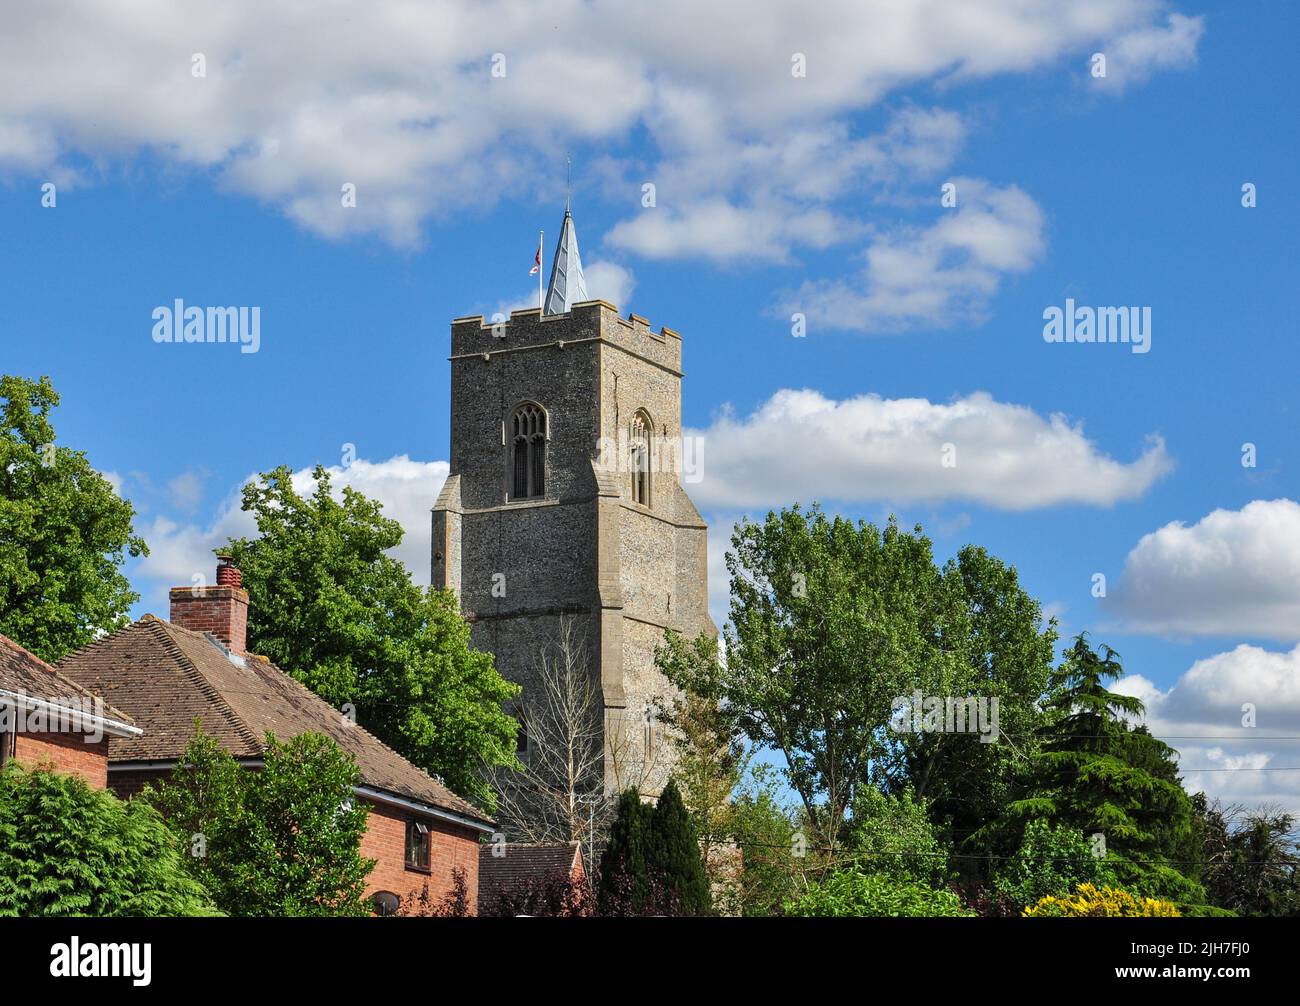 The Church of St Peter and St Paul, Bardwell, Suffolk, England, UK Stock Photo